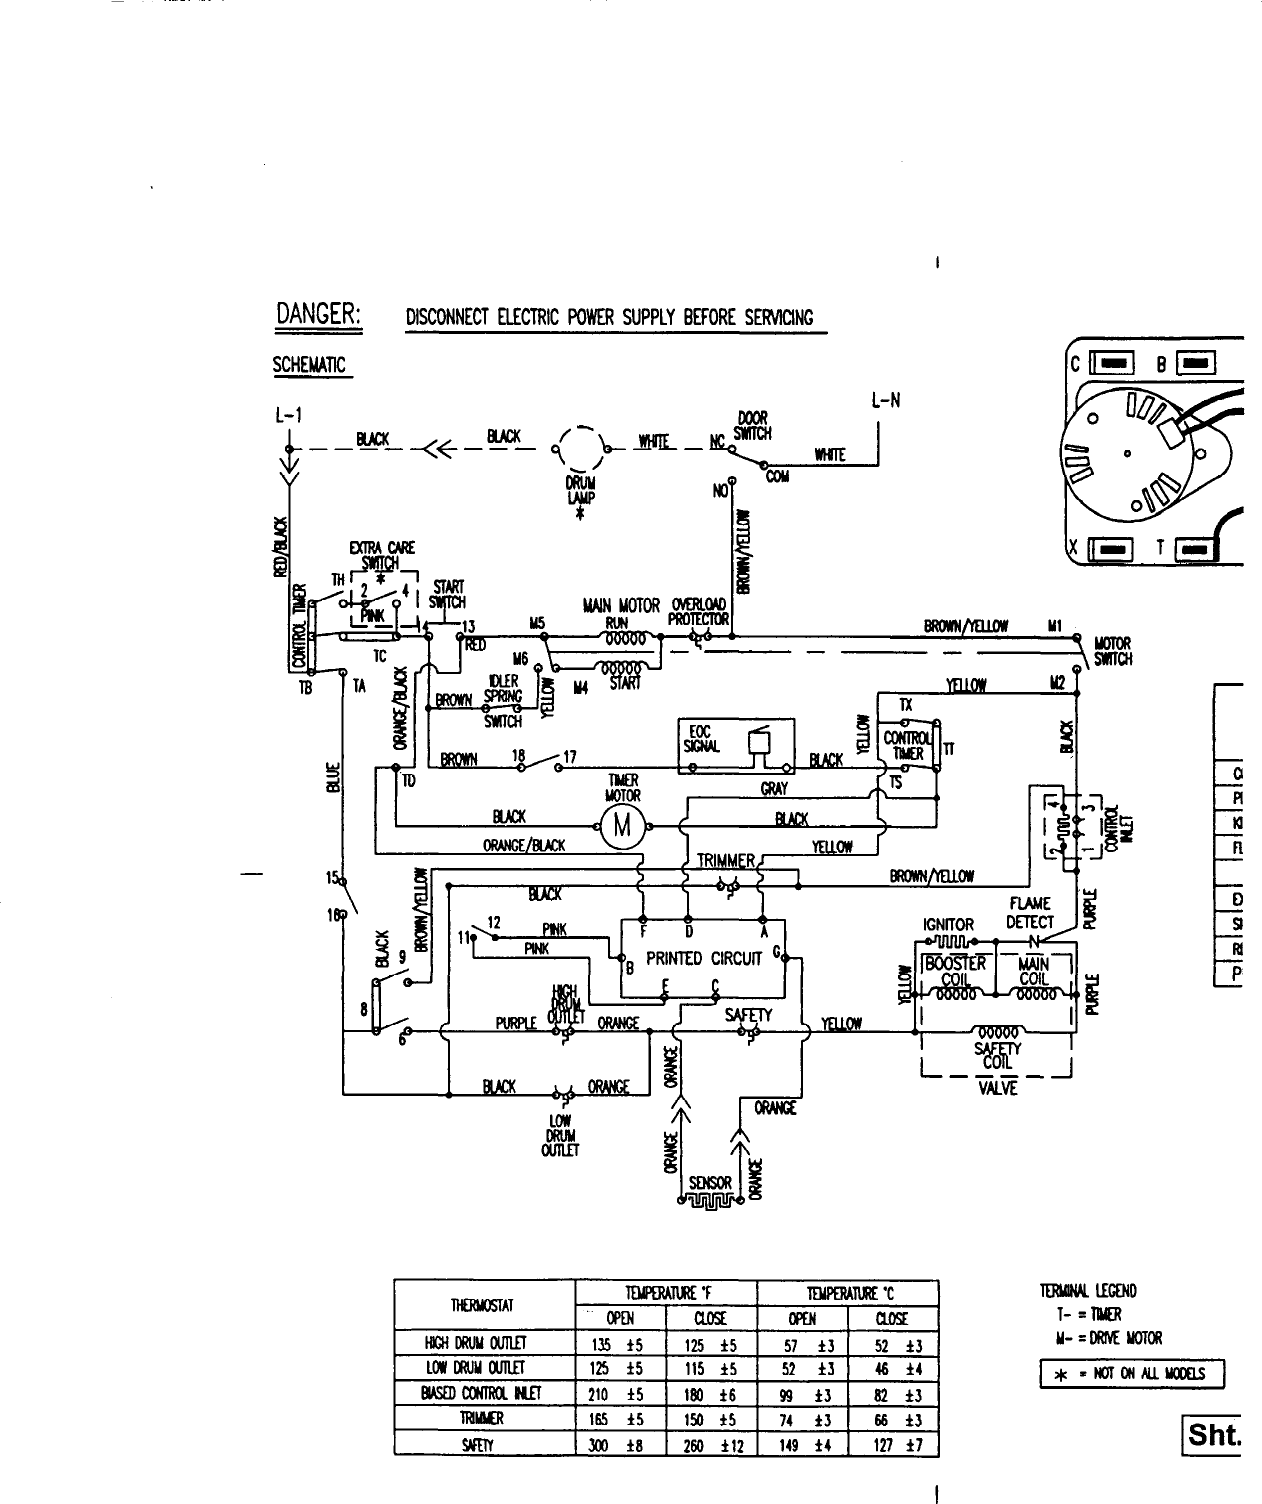 Page 1 of 2 - Friday, March 26, 2004.max  GE Dryer Schematic 31-10000